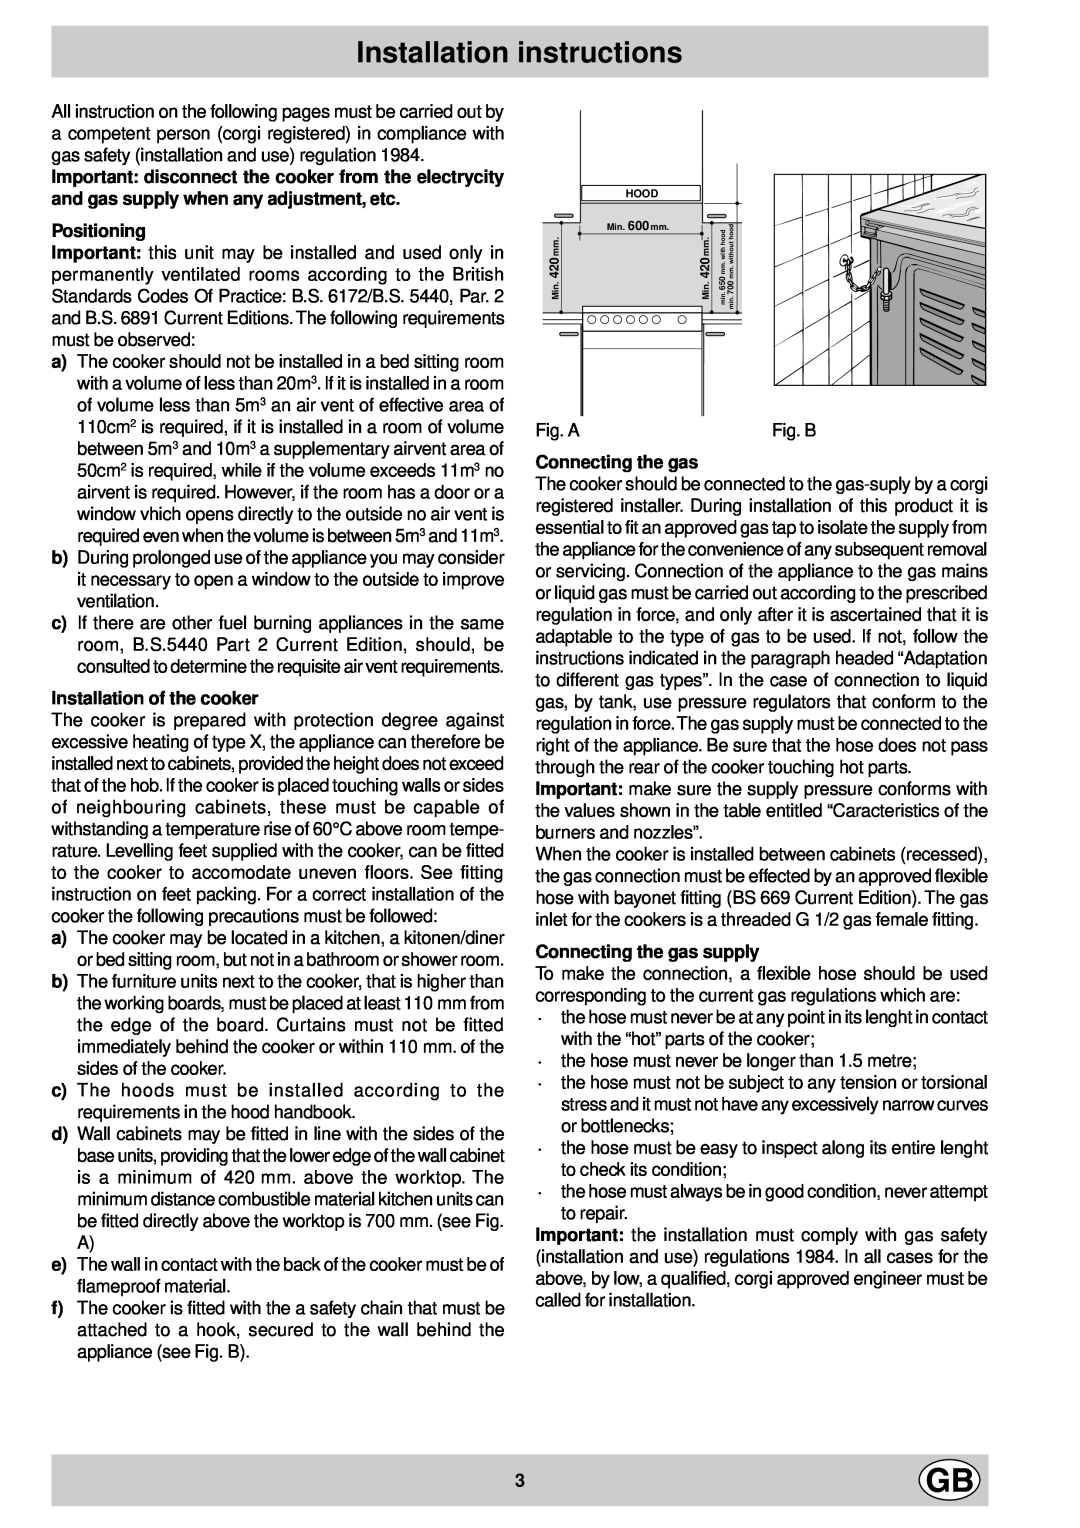 Indesit KG6407 LV/G, KG6407 AV/G Installation instructions, Positioning, Installation of the cooker, Connecting the gas 